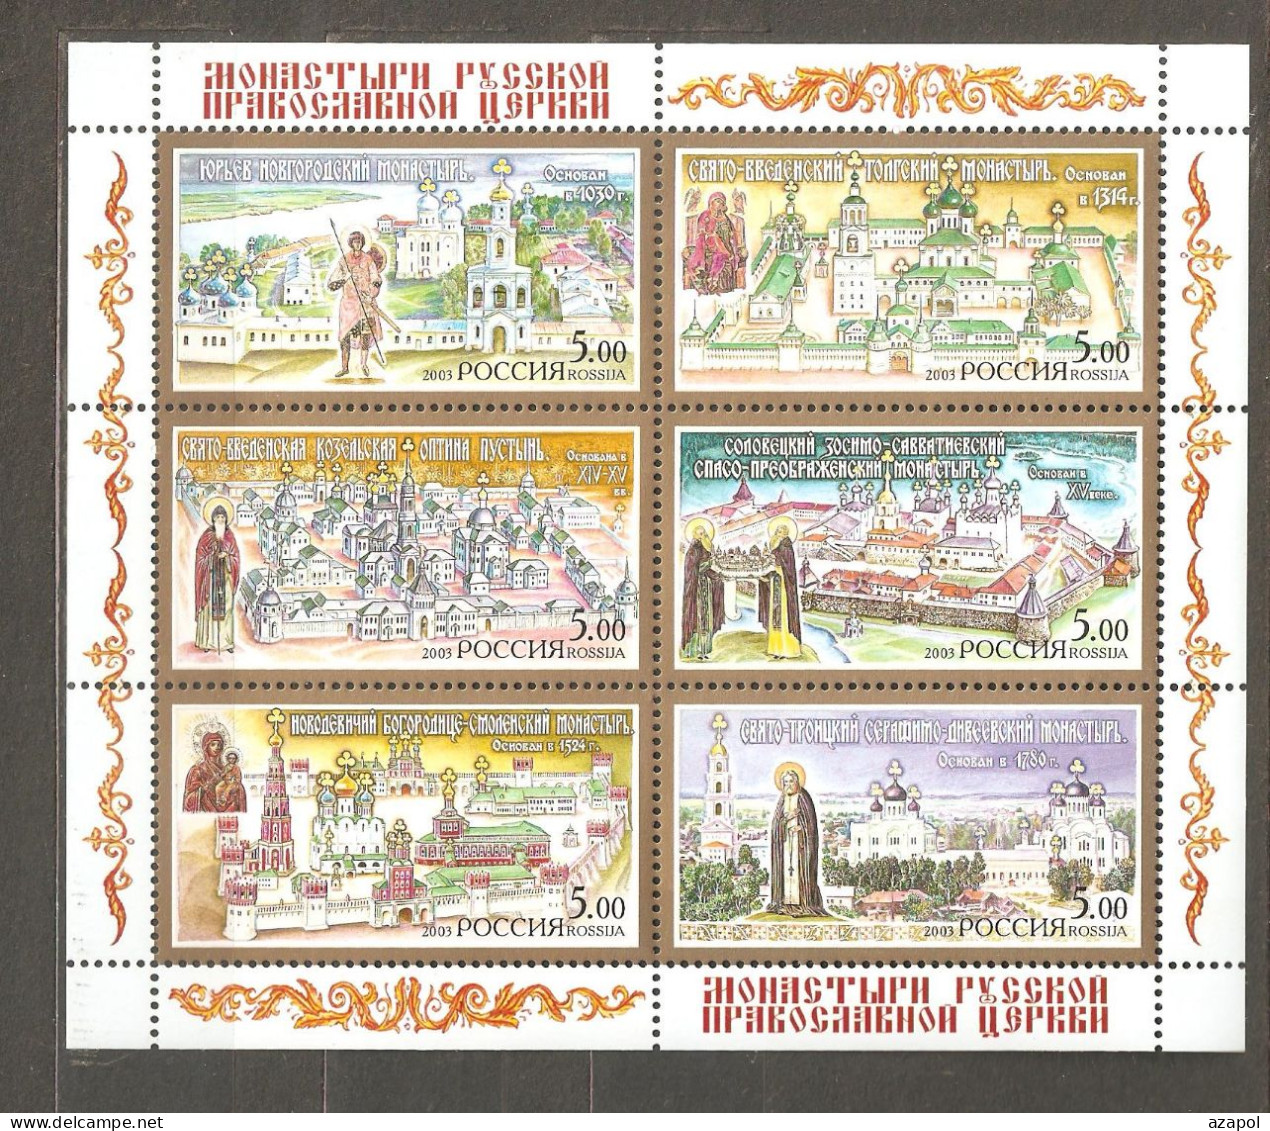 Russia: Mint Block, Architecture - Monasteries Of Russian Orthodox Church, 2003, Mi#Bl-53, MNH - Abbayes & Monastères